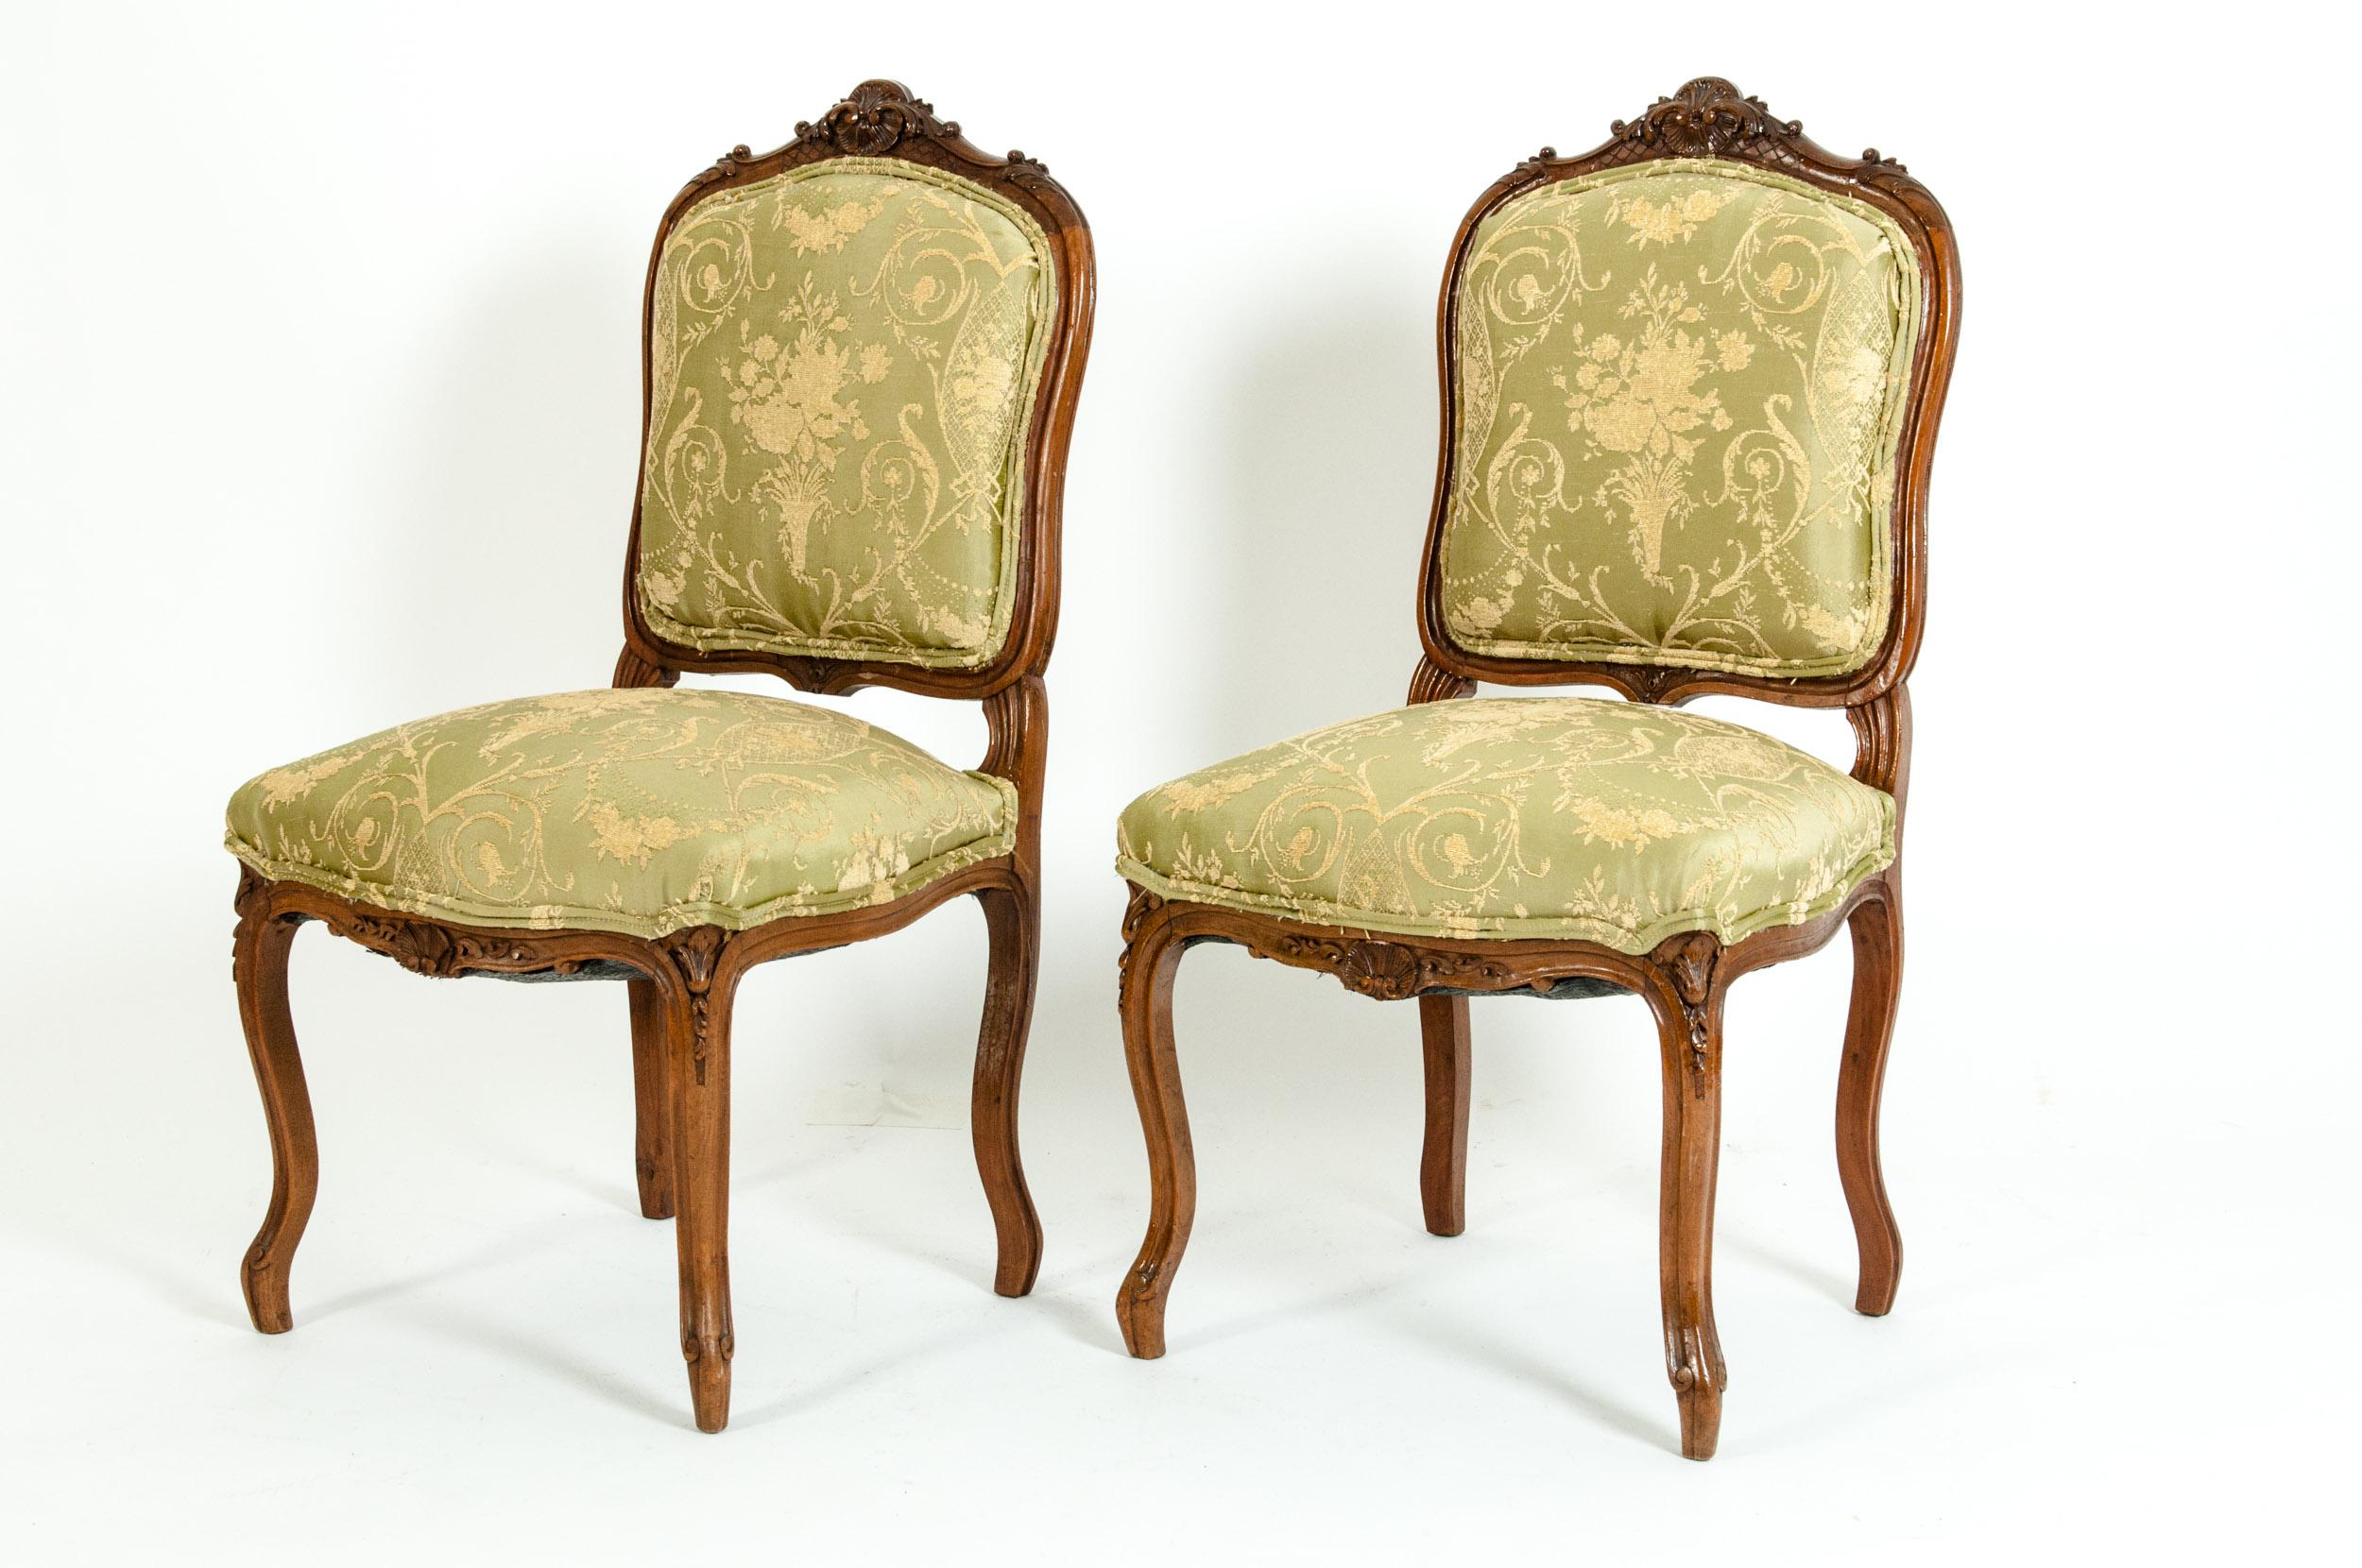 Mid-19th century mahogany wood frame pair side chairs. Each chair is very sturdy and in good antique condition with age / use appropriate wear. The upholstery is very immaculate. Each chair stand about 38 inches H x 20 inches wide x 17 inches deep.